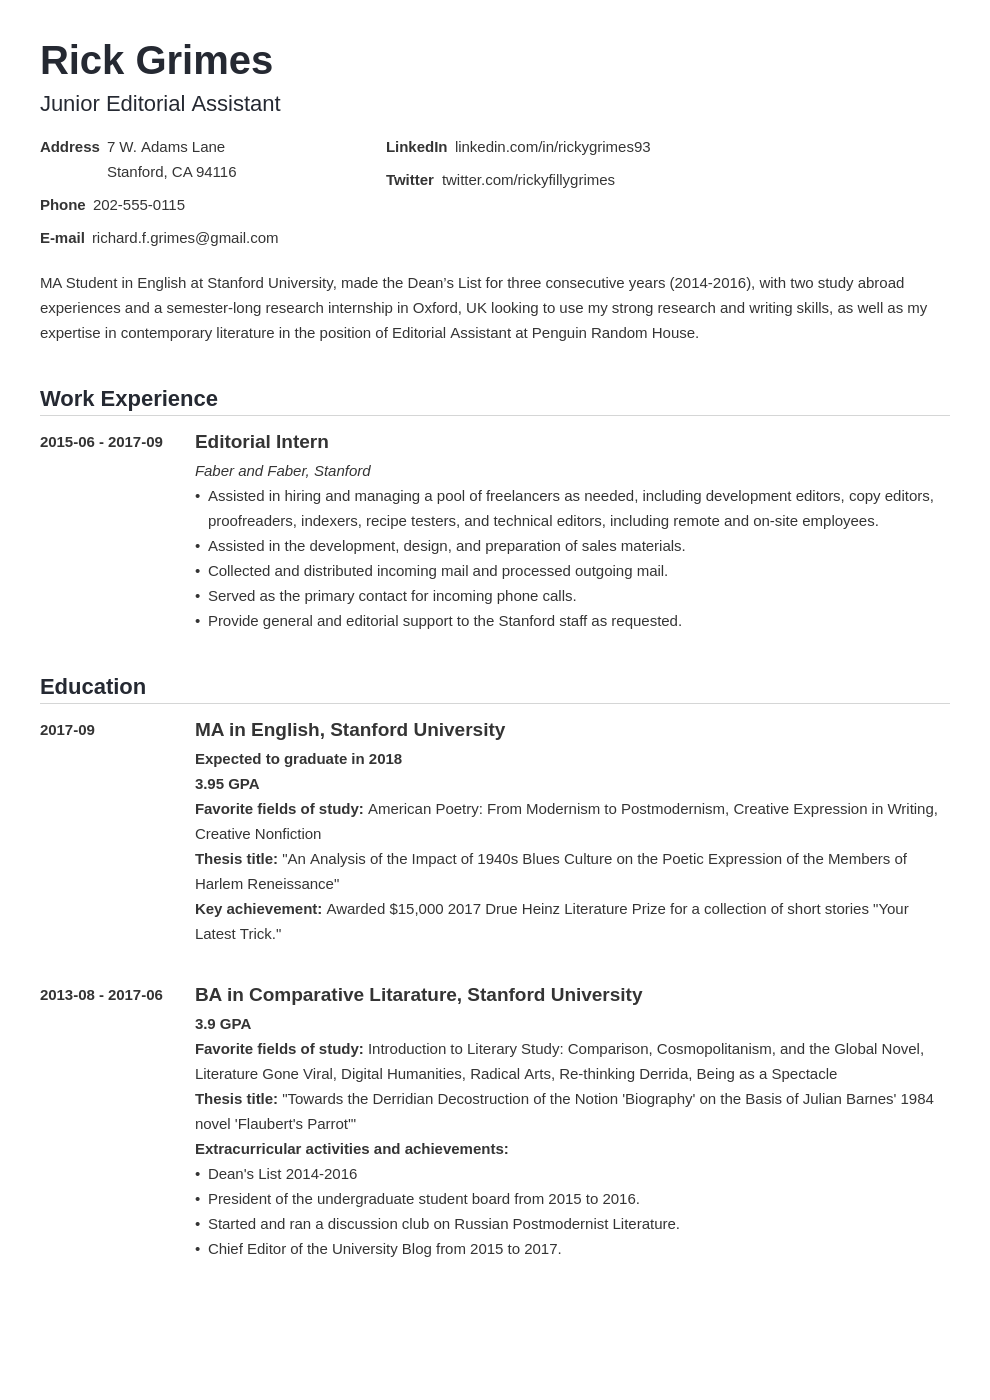 Student Cv Template from cdn-images.zety.com